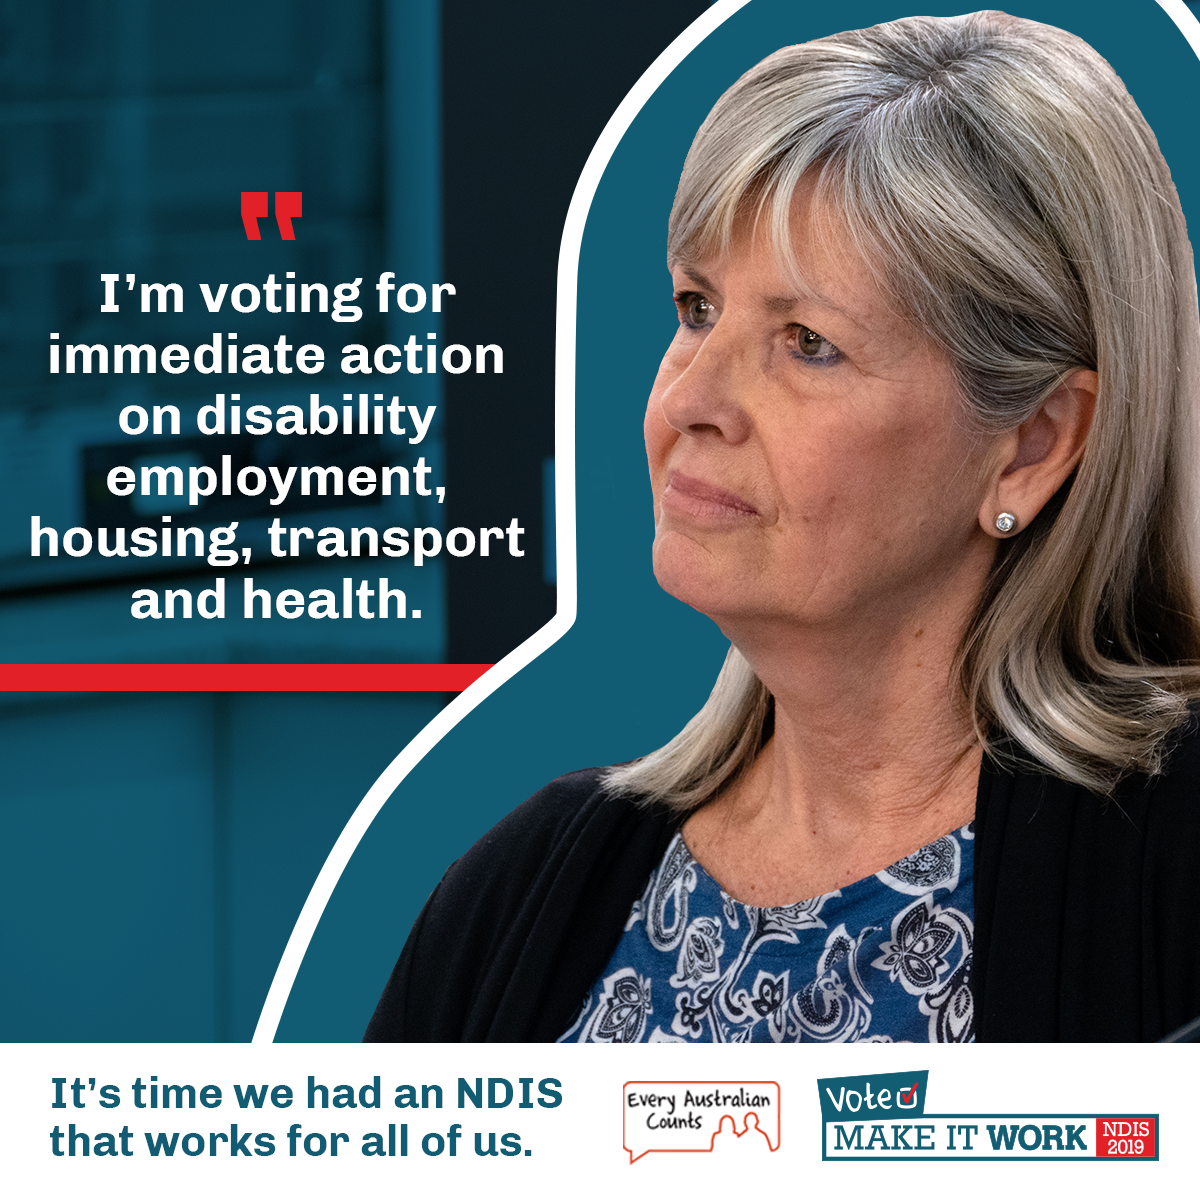 Sharegraphic - I'm voting for immediate action on disability, employment, housing, transport and health